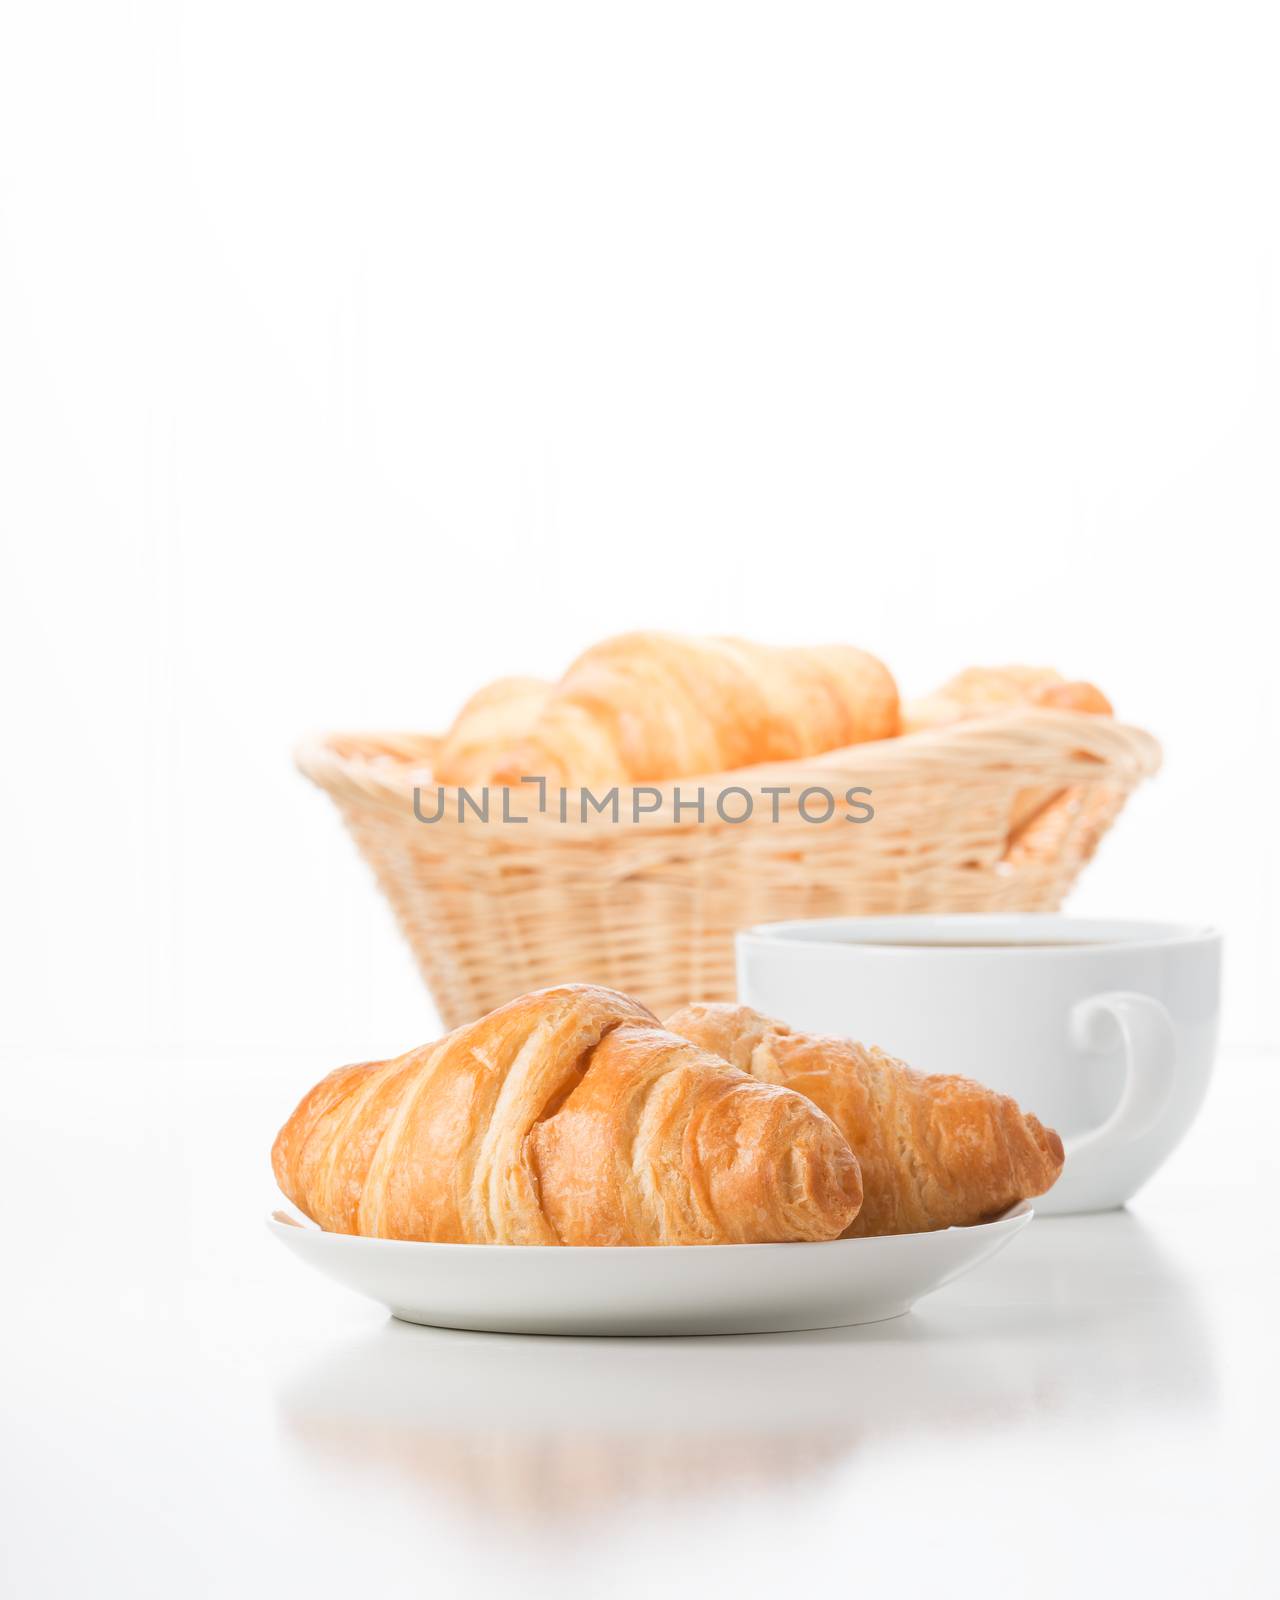 Fresh and delicate croissants served with coffee.